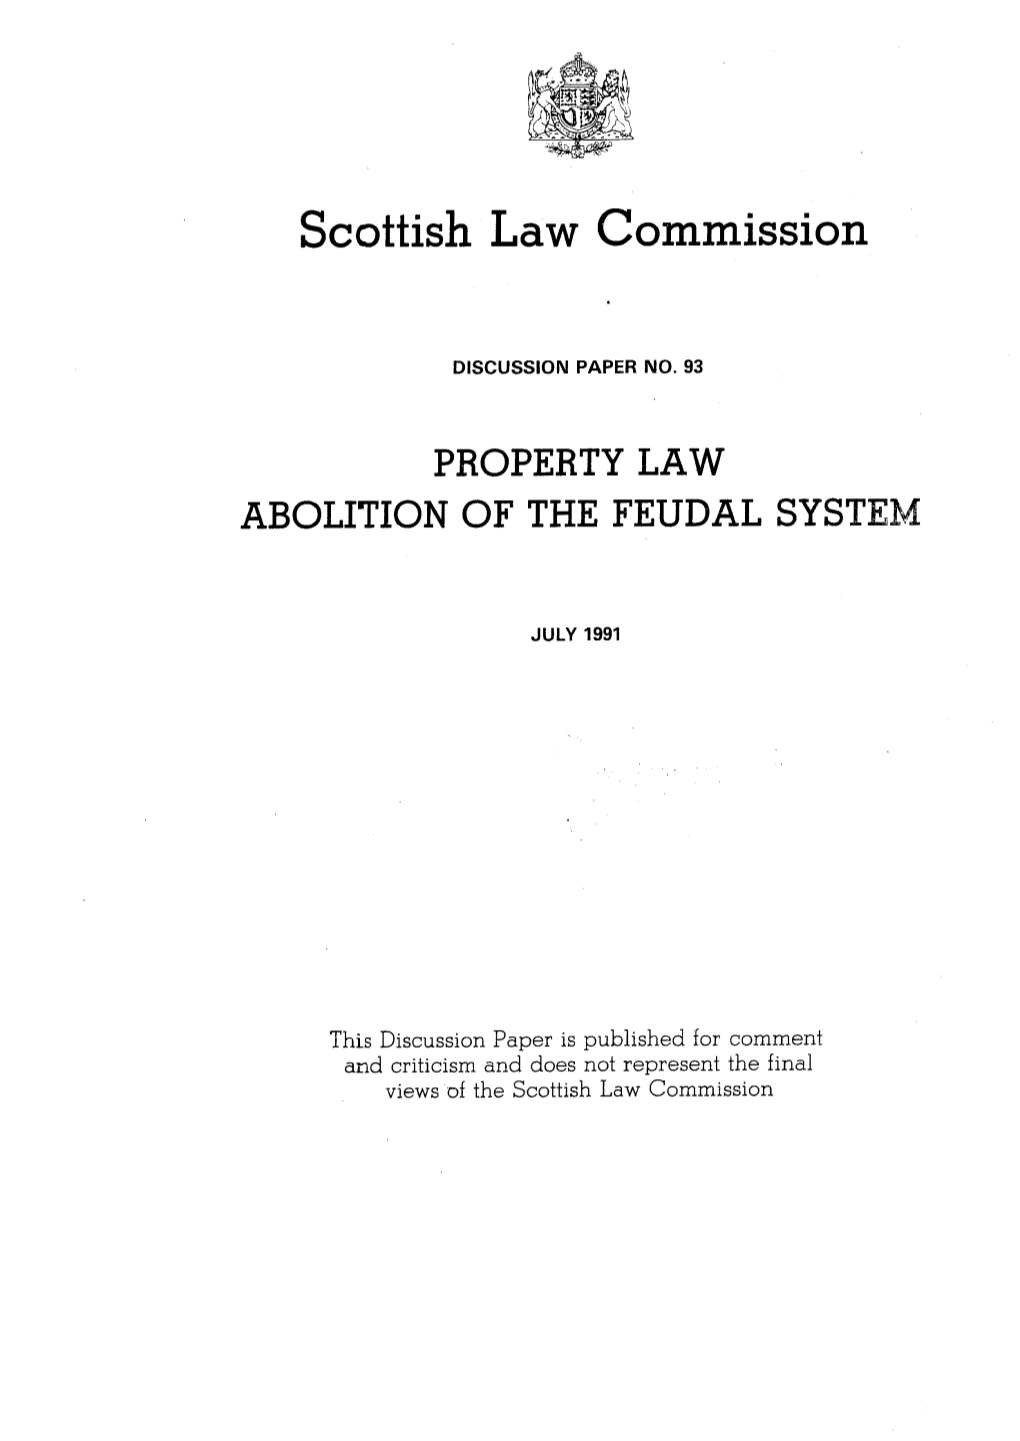 Property Law: Abolition of the Feudal System (DP